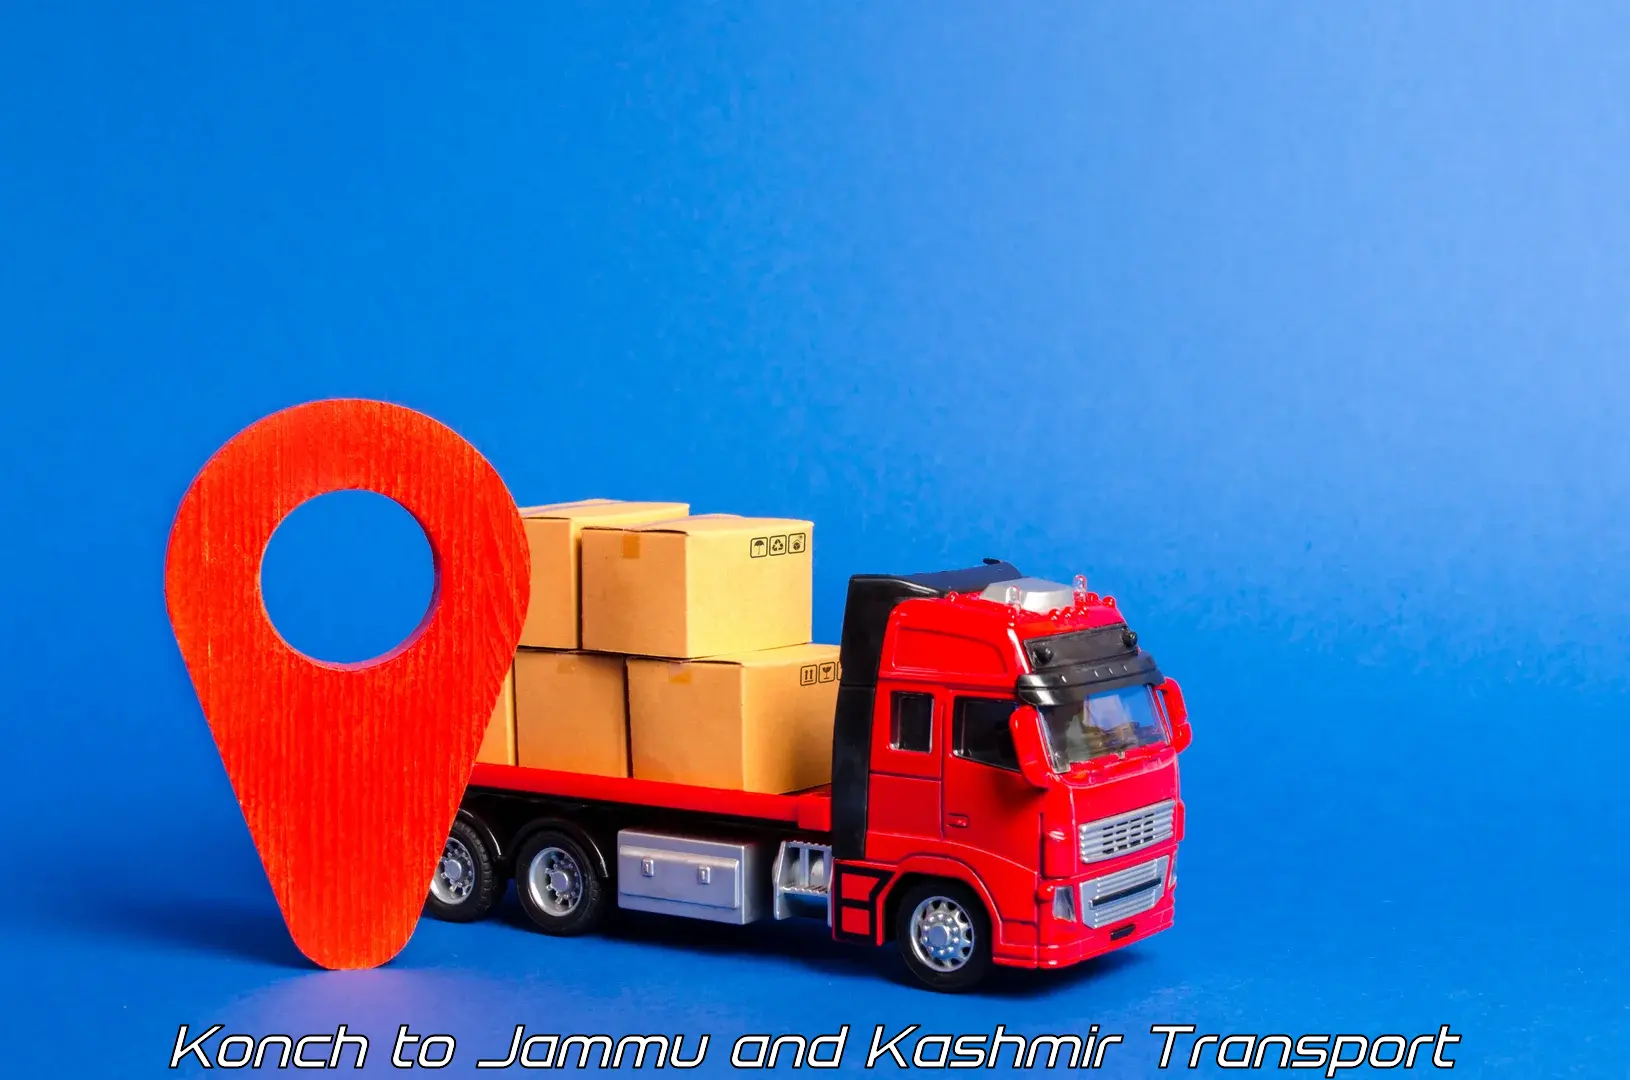 Transport in sharing Konch to Jammu and Kashmir